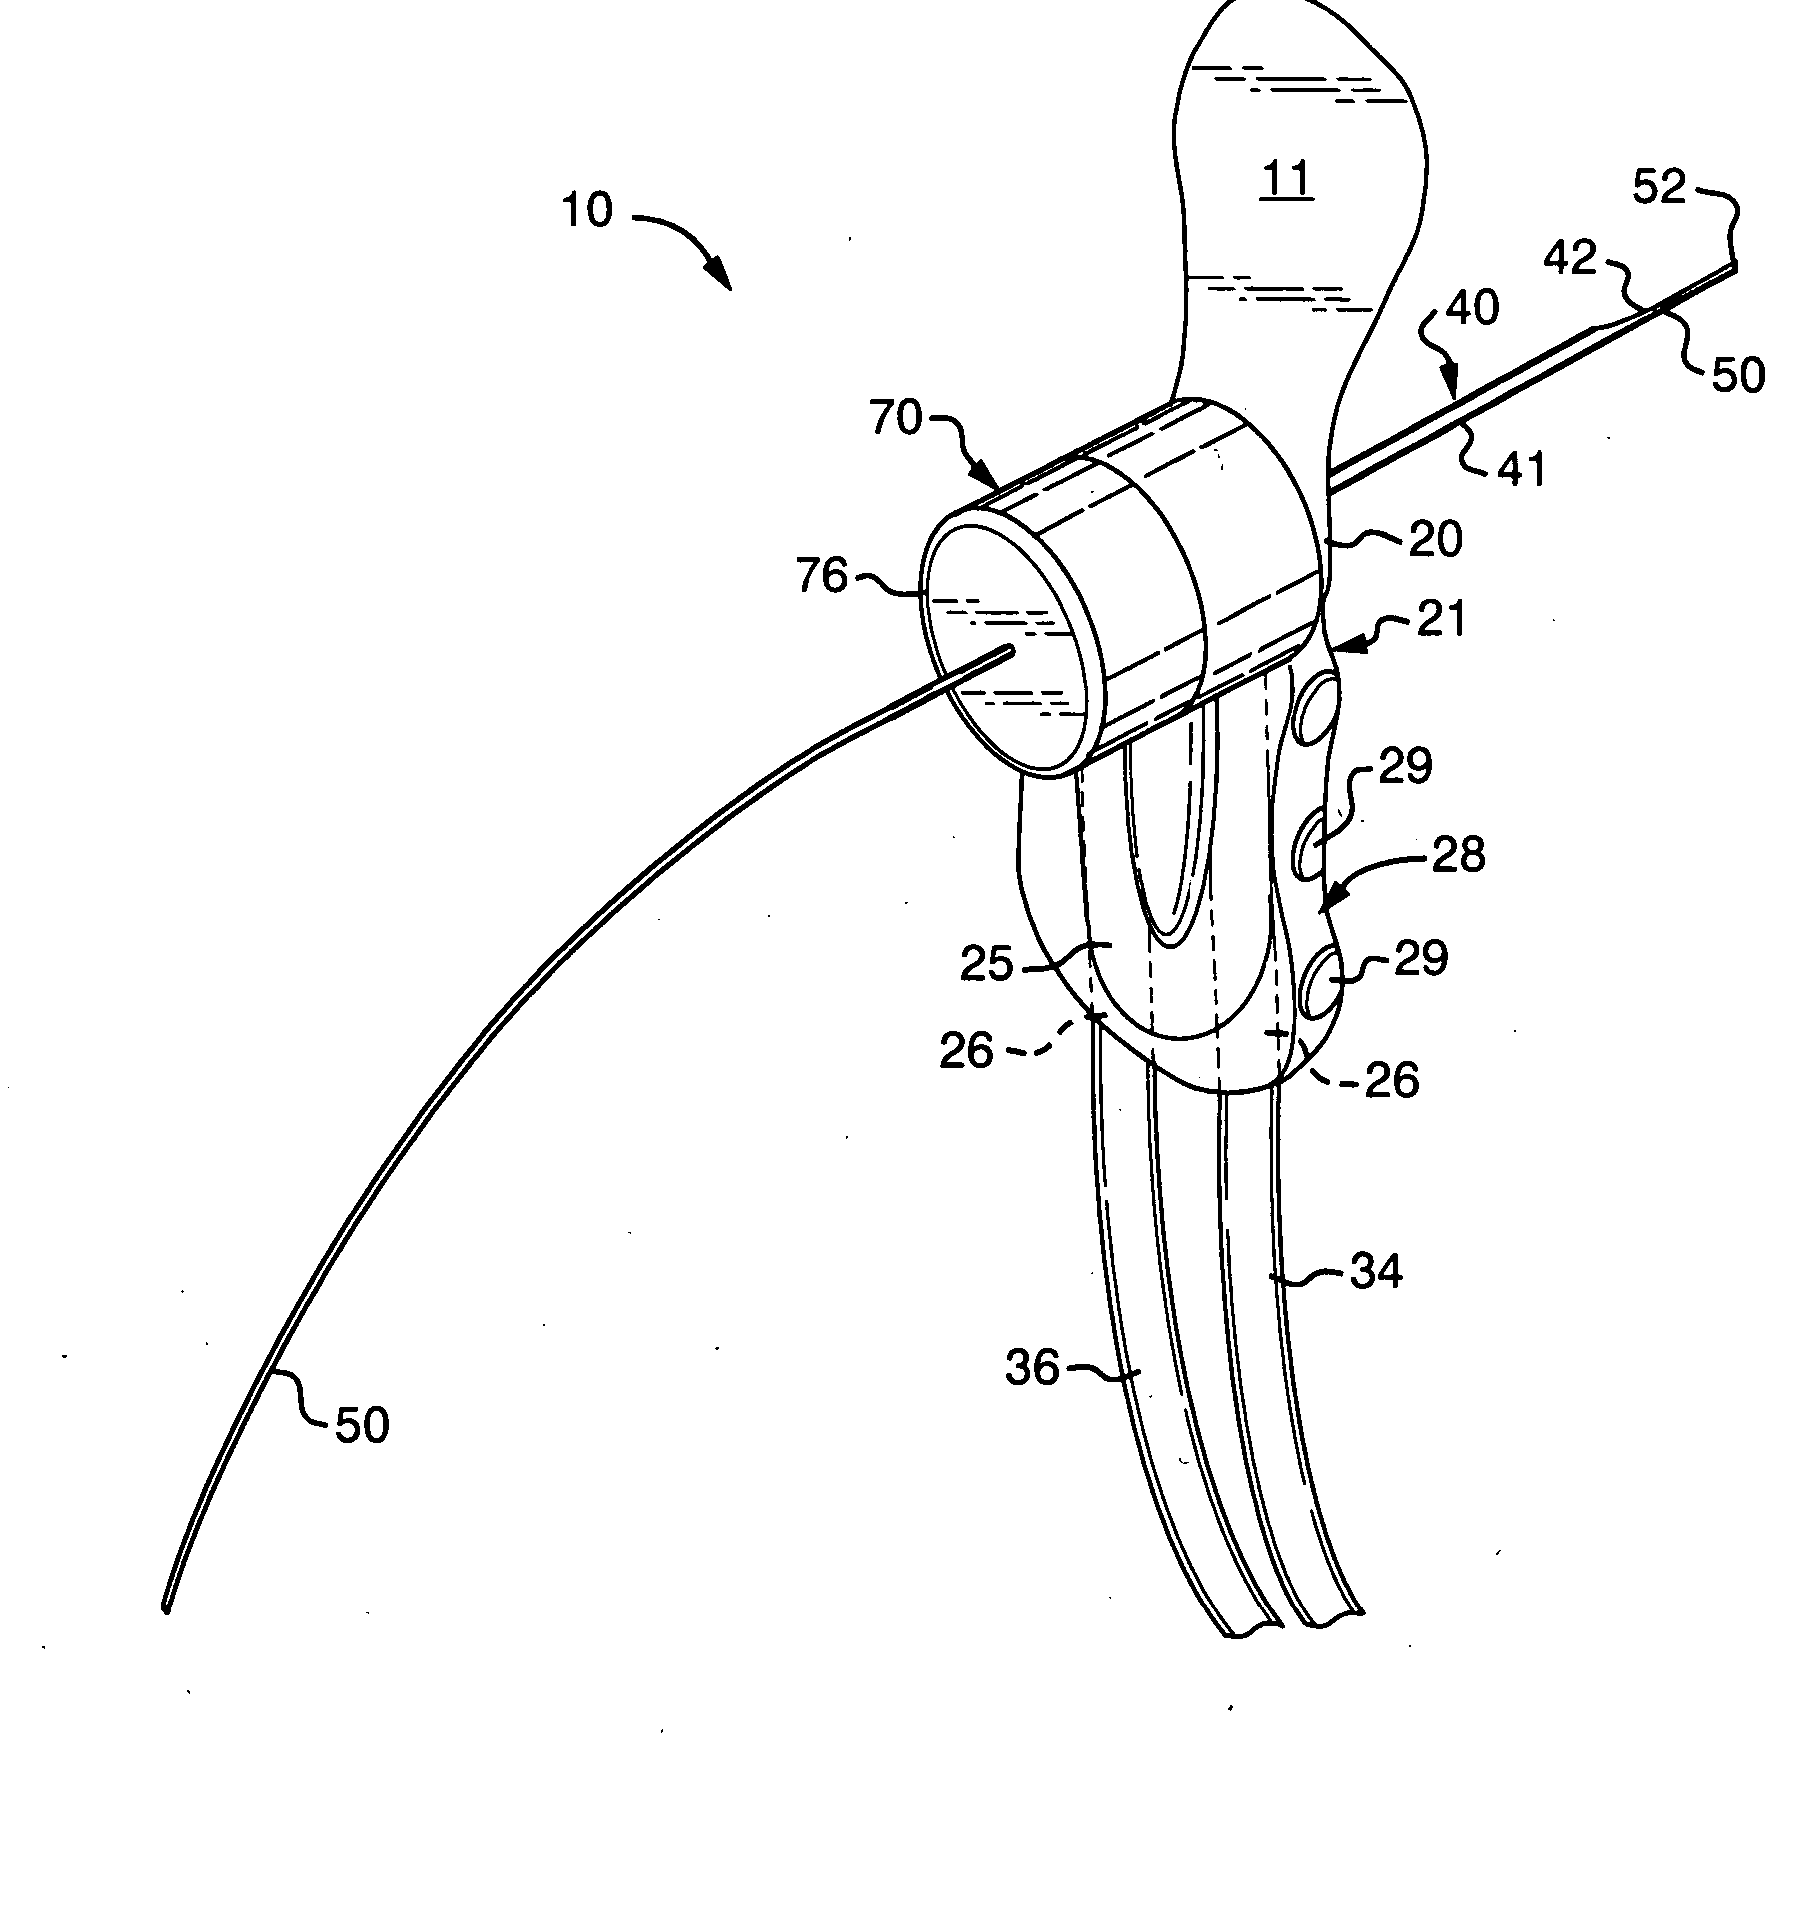 Medical instrument for accessing a breast duct for performing a medical procedure